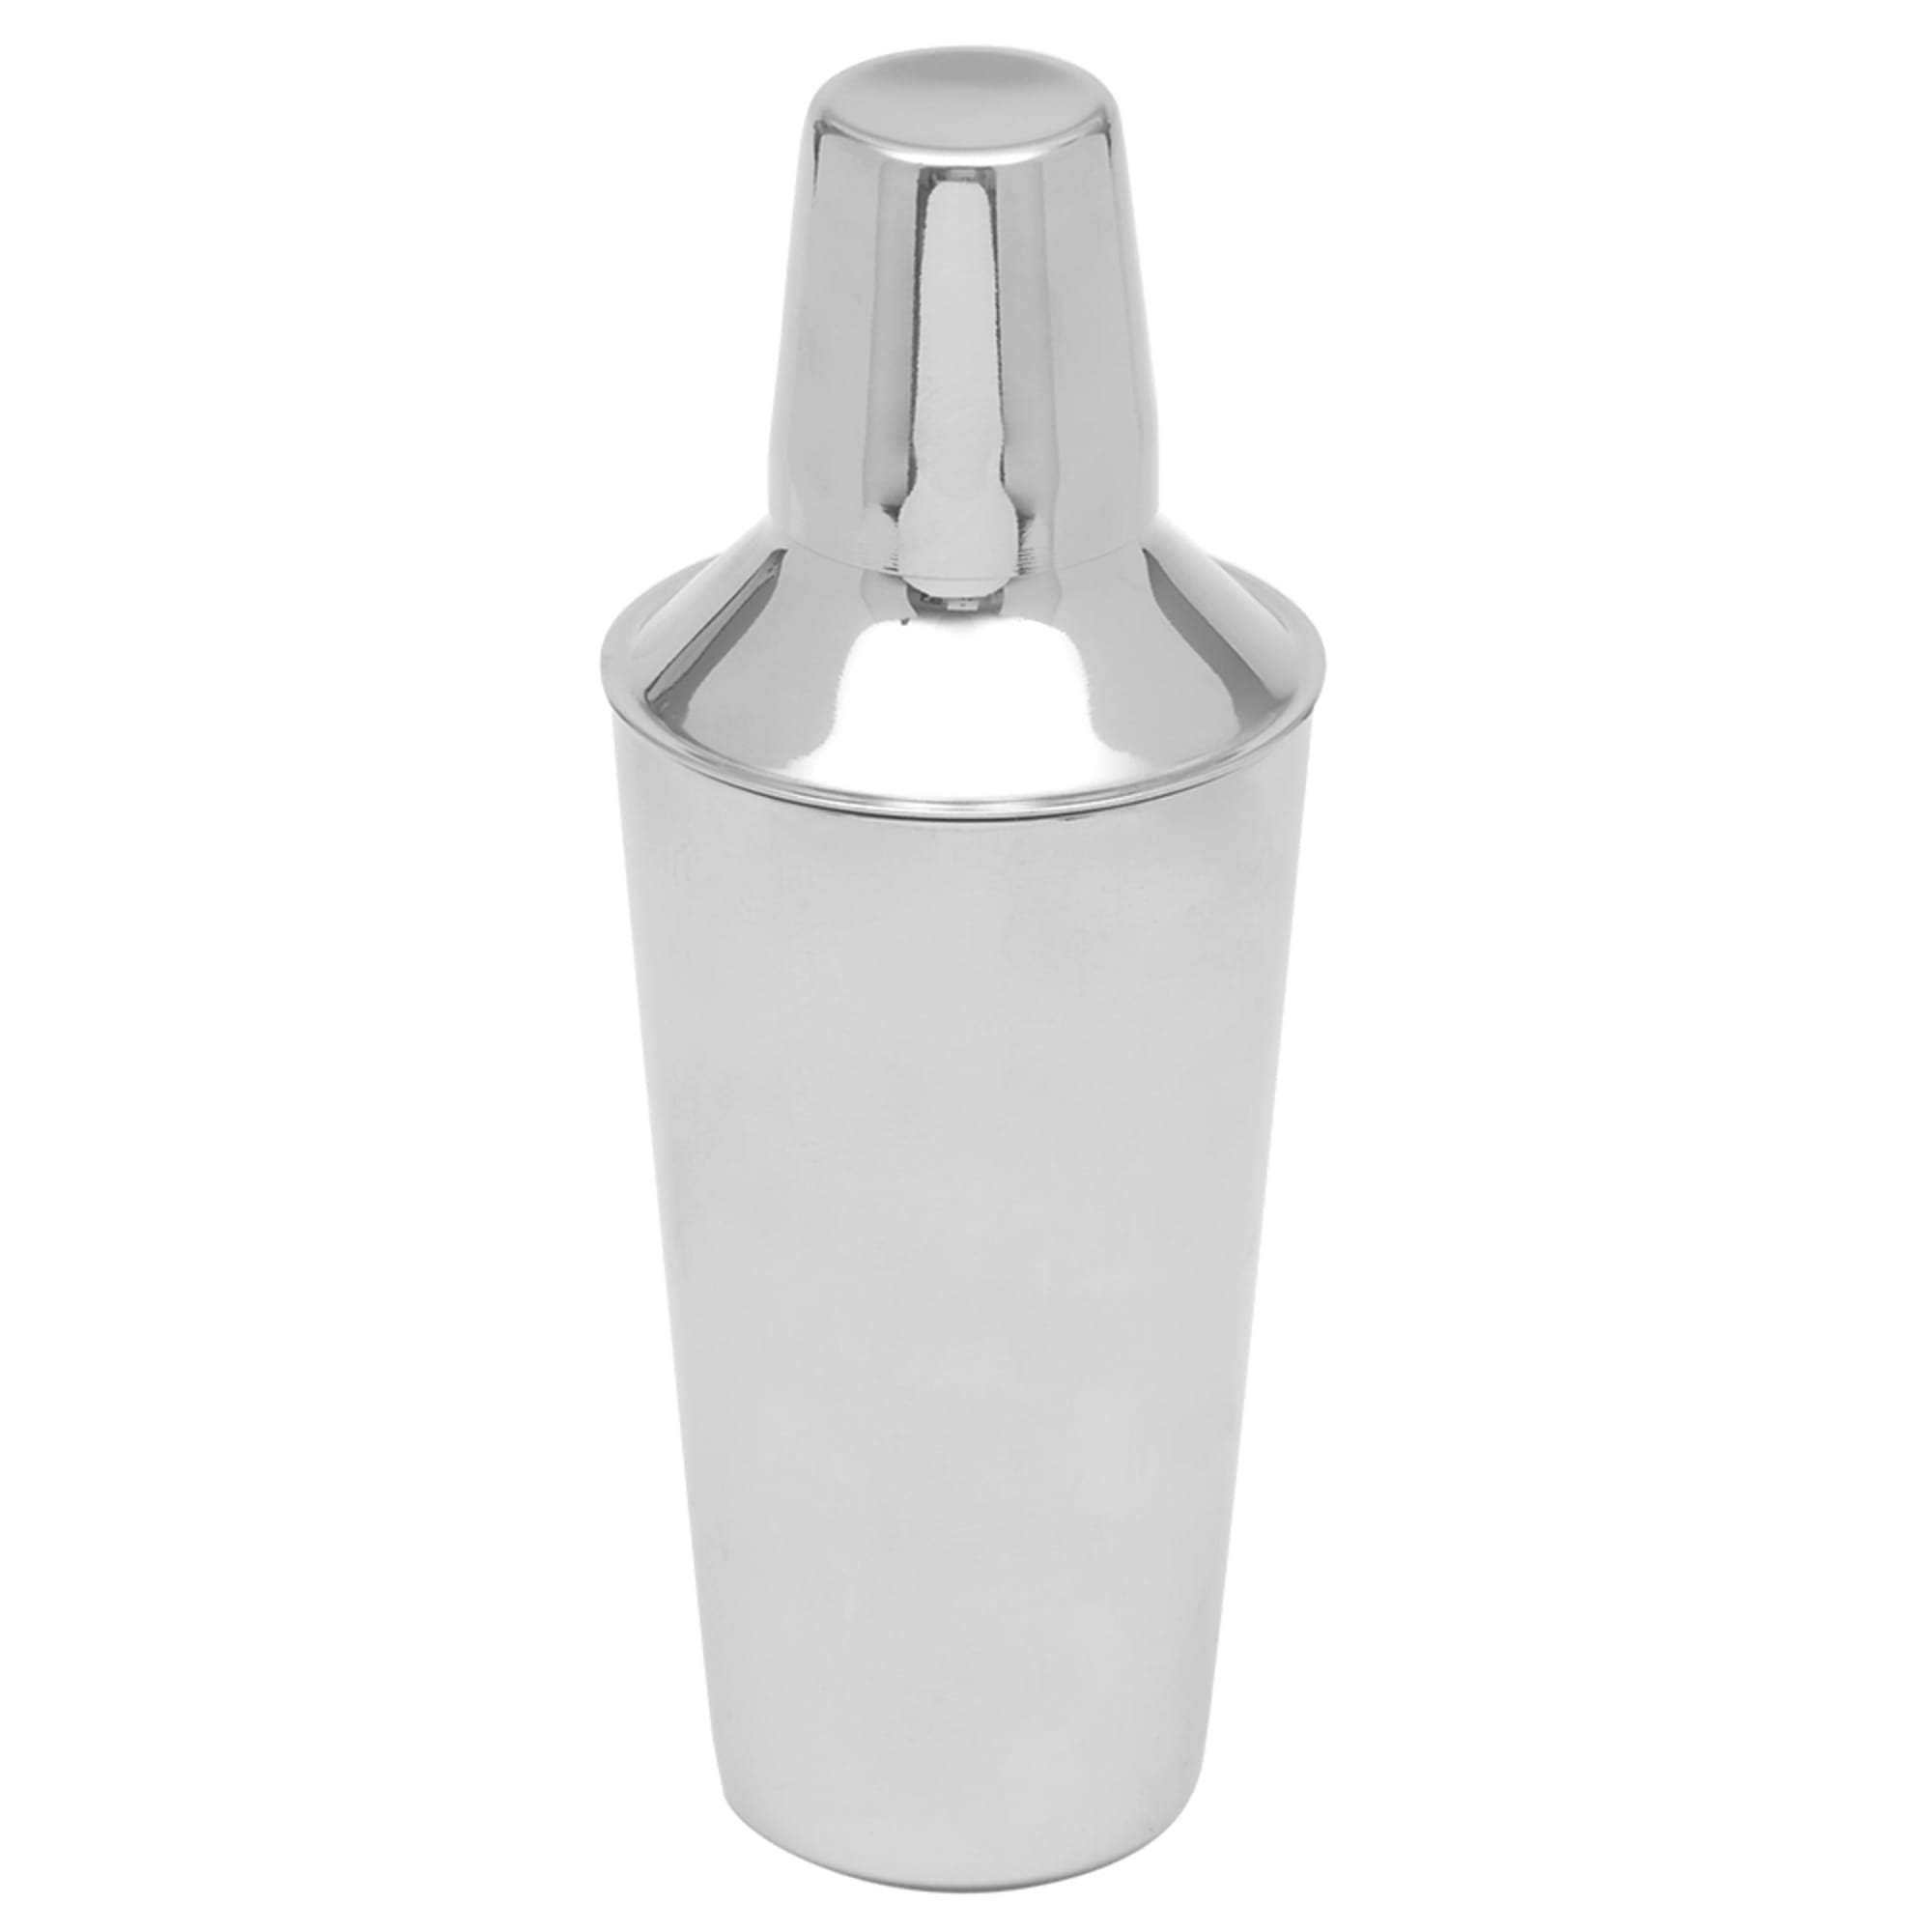 Home Basics 750 ml Stainless Steel Cocktail Shaker, Silver $5.00 EACH, CASE PACK OF 12